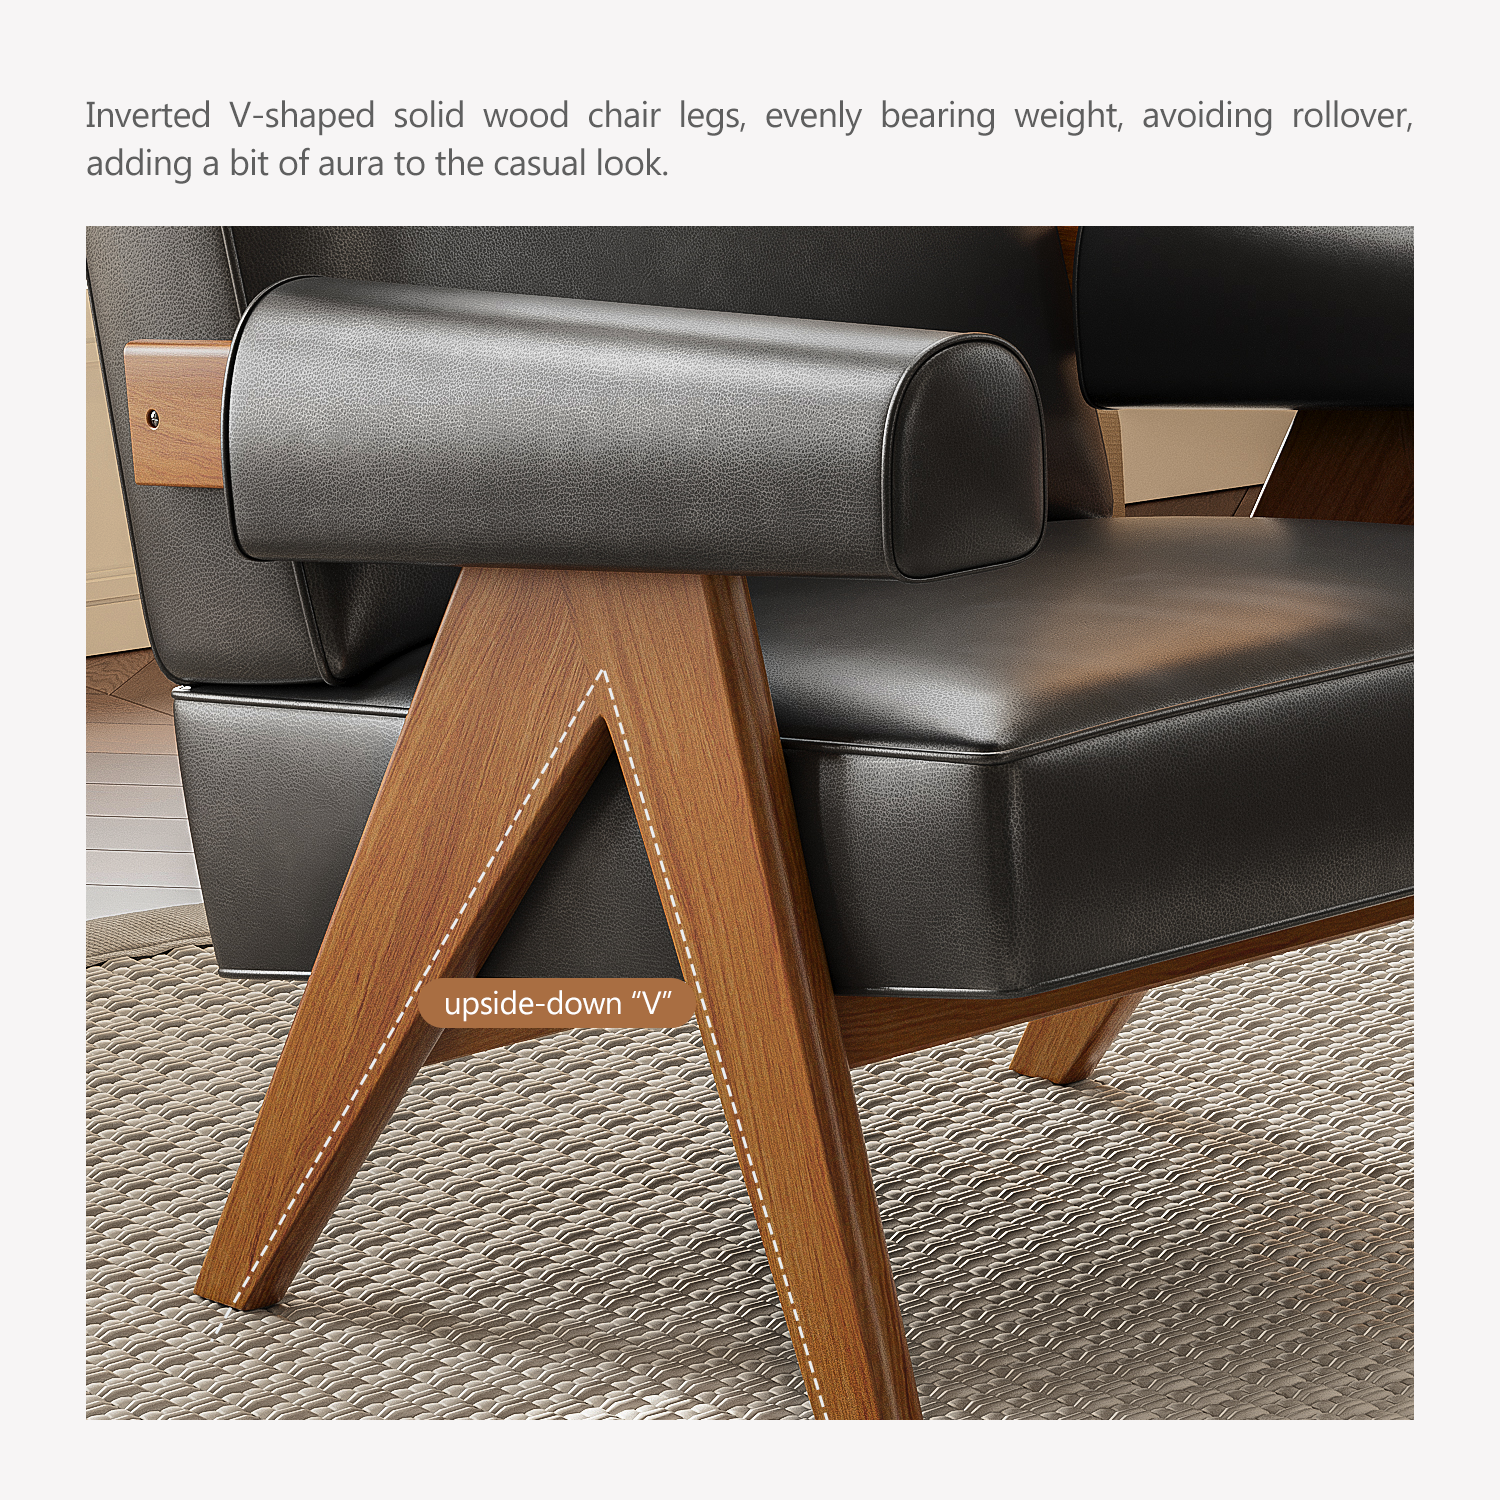 Arthia Designs - Italian Leather Chandigarh Armchair by Pierre Jeanneret - Review